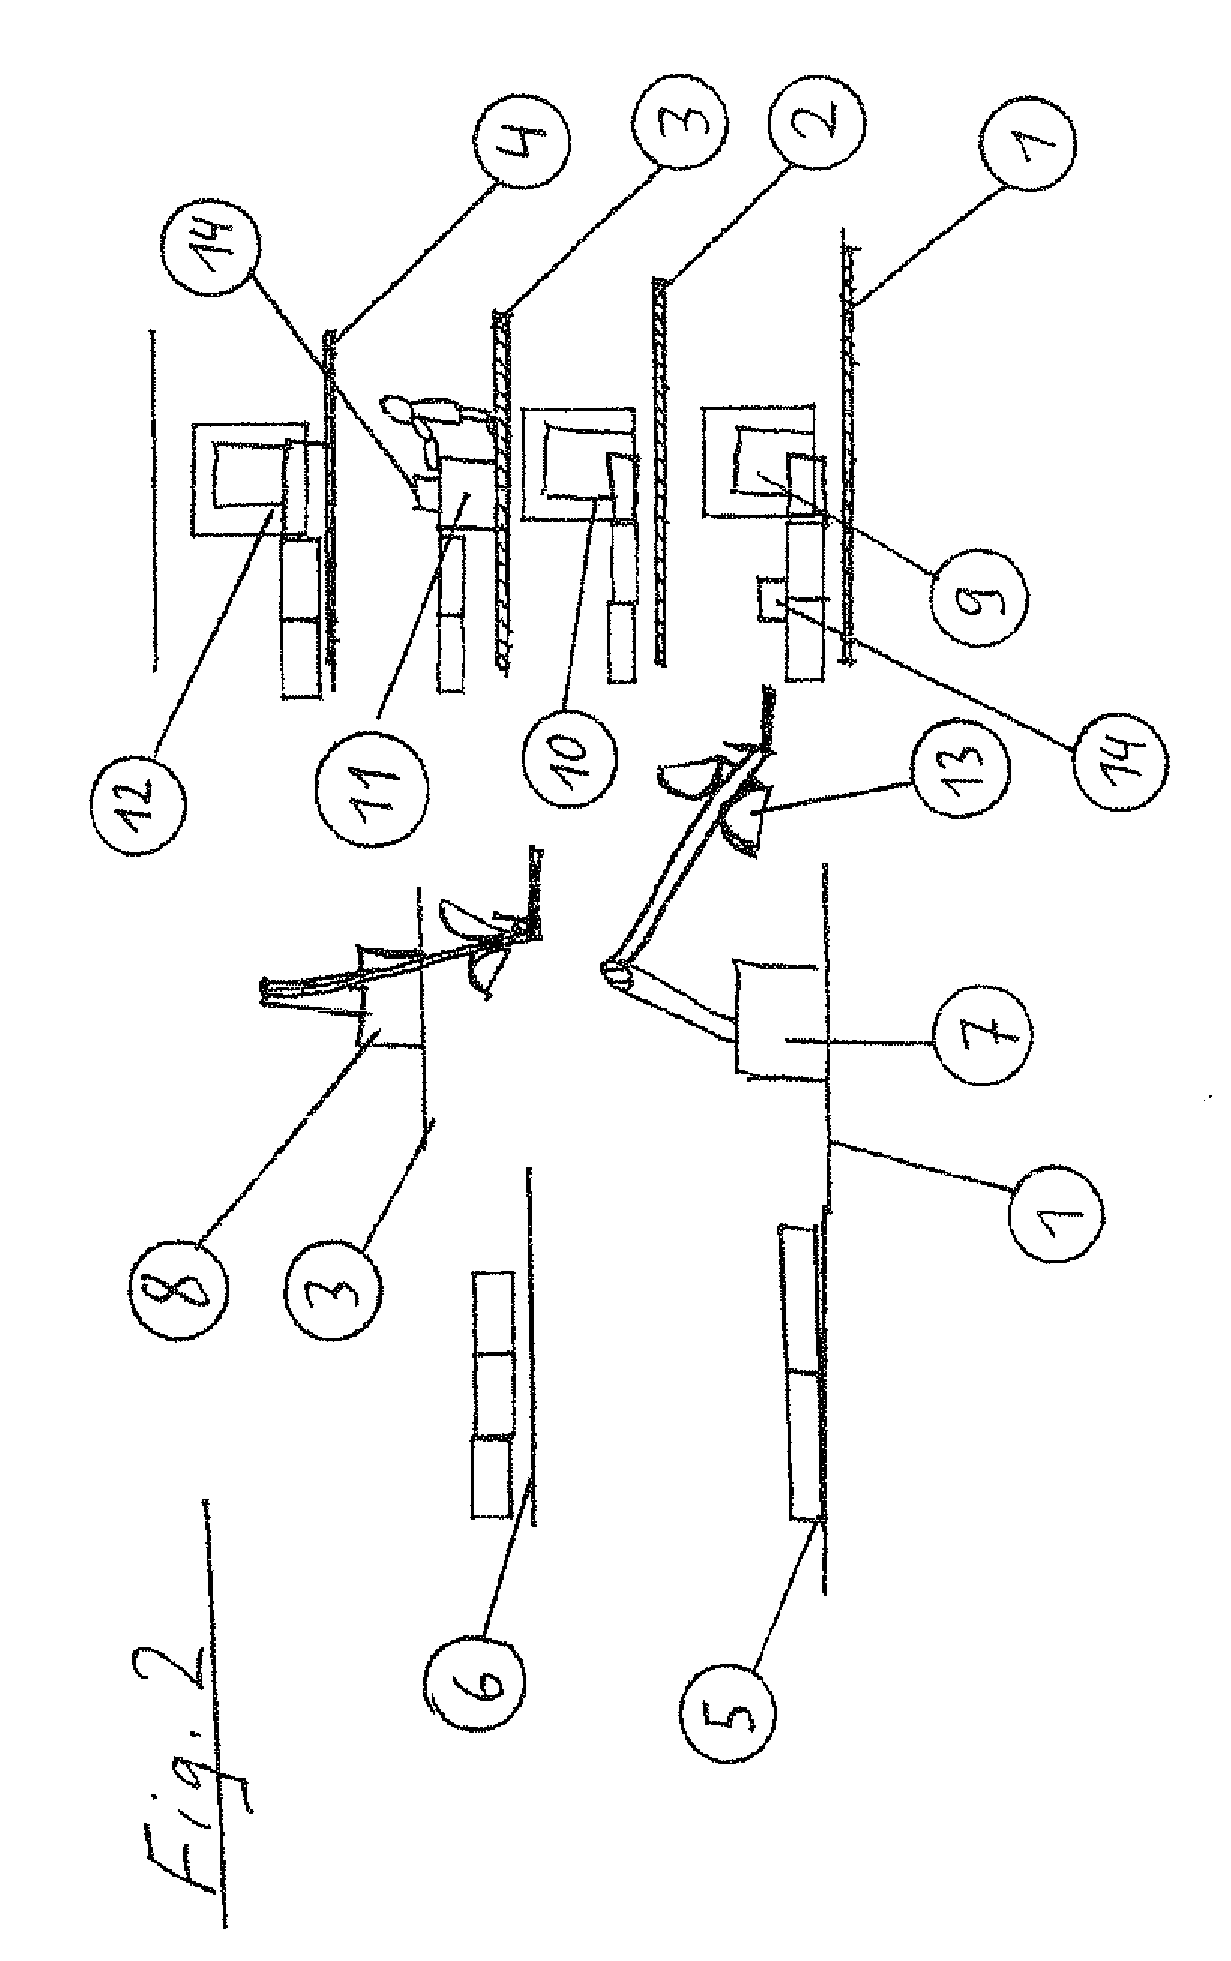 Device and method for detecting and neutralizing hazardous goods